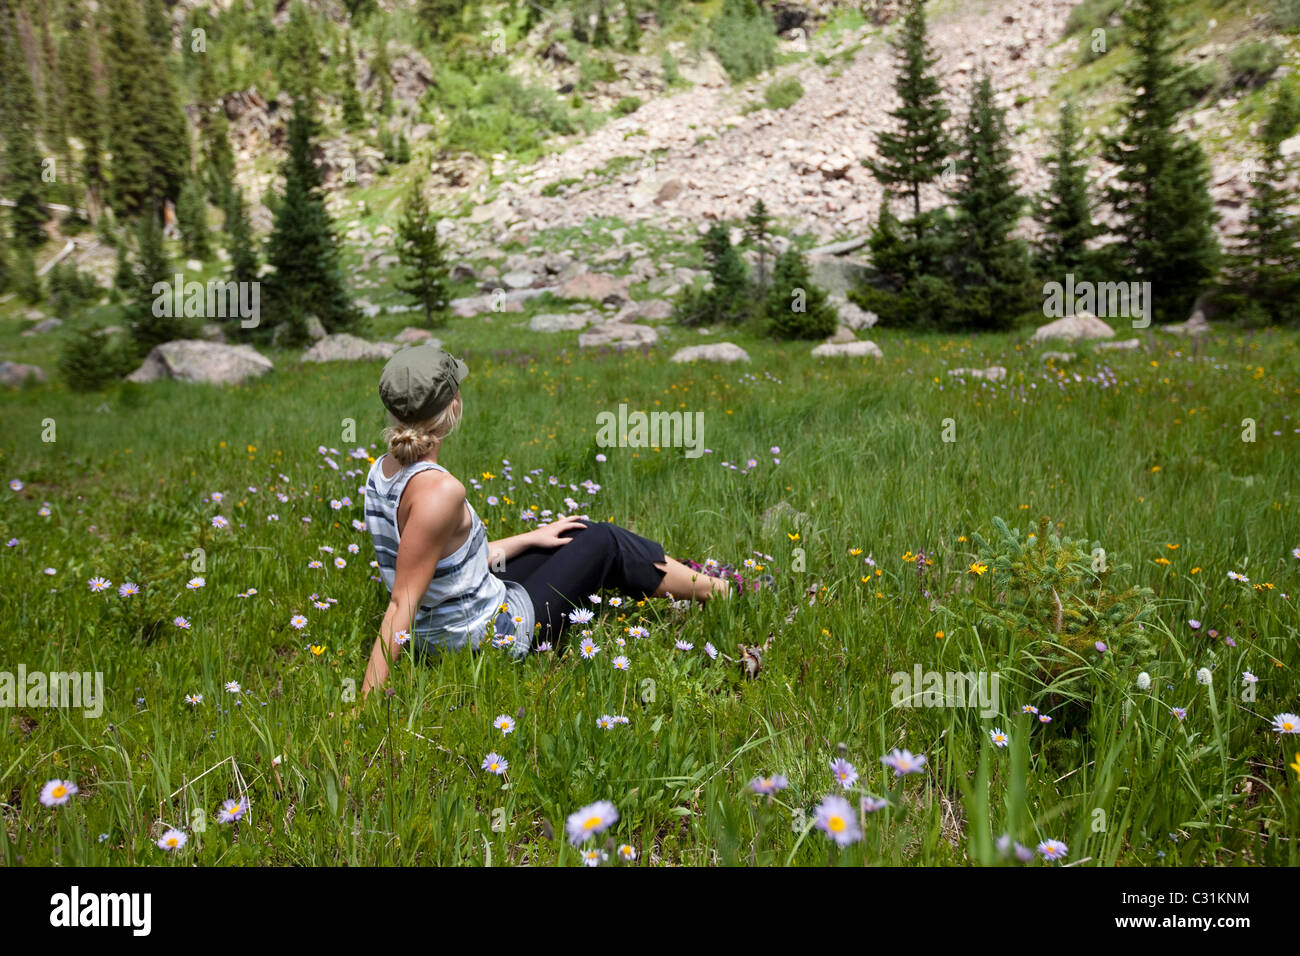 A young woman sits peacefully in a field of wildflowers enjoying the view. Stock Photo